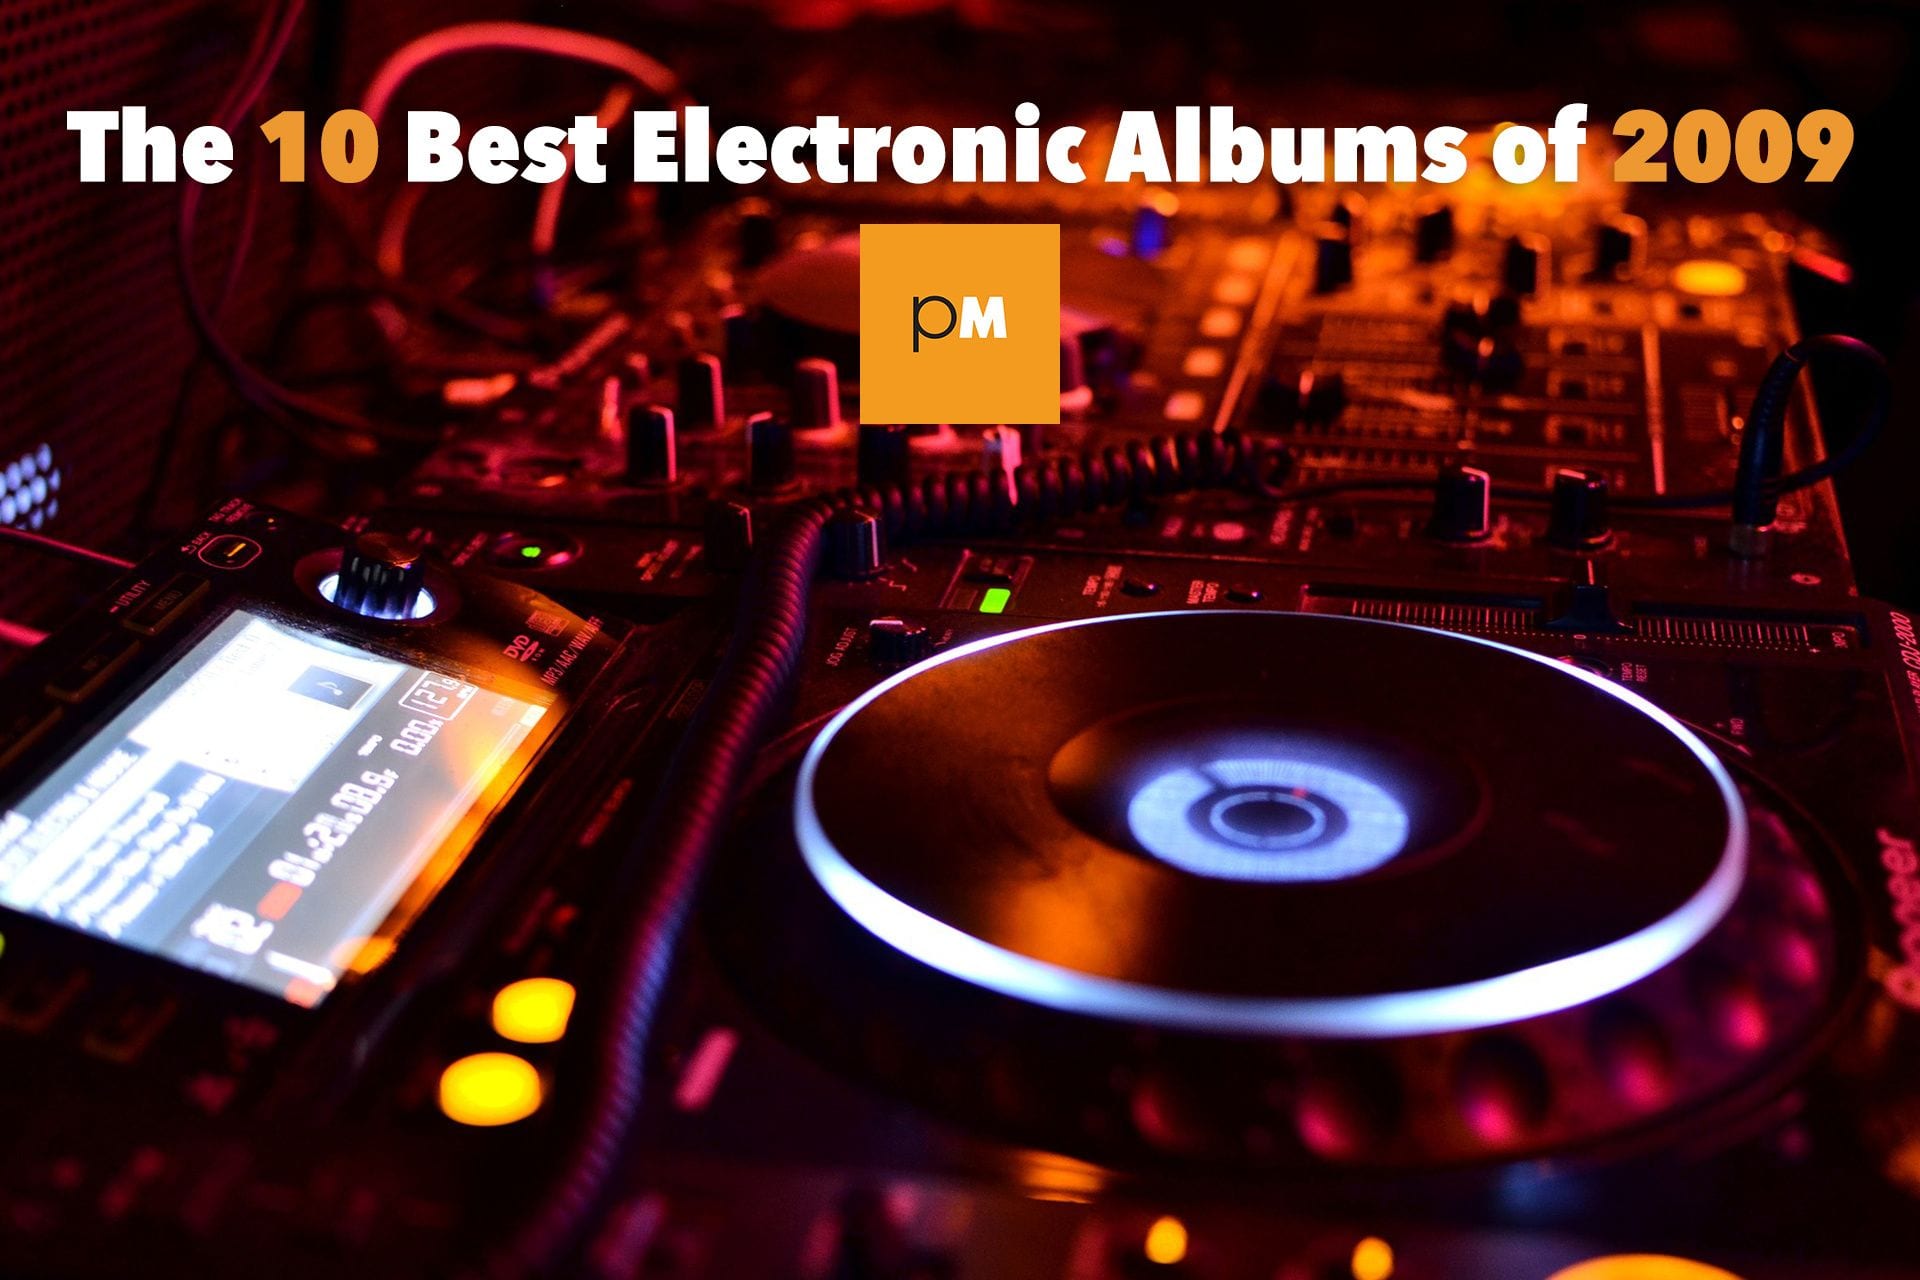 The 10 Best Electronic Albums of 2009